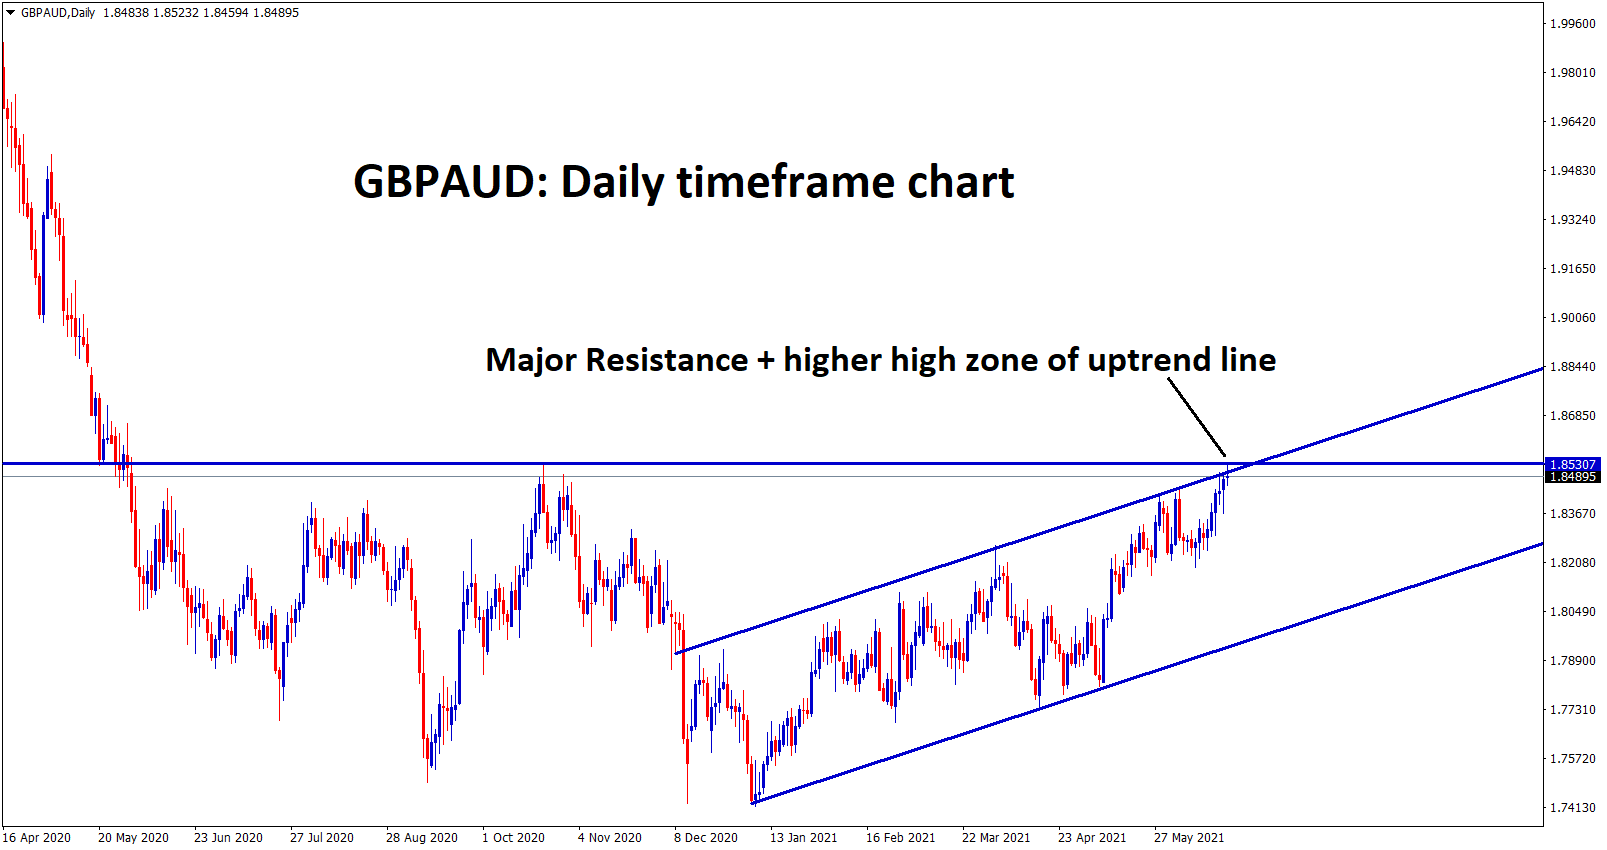 GBPAUD at the top resistance level and higher high zone in the daily chart